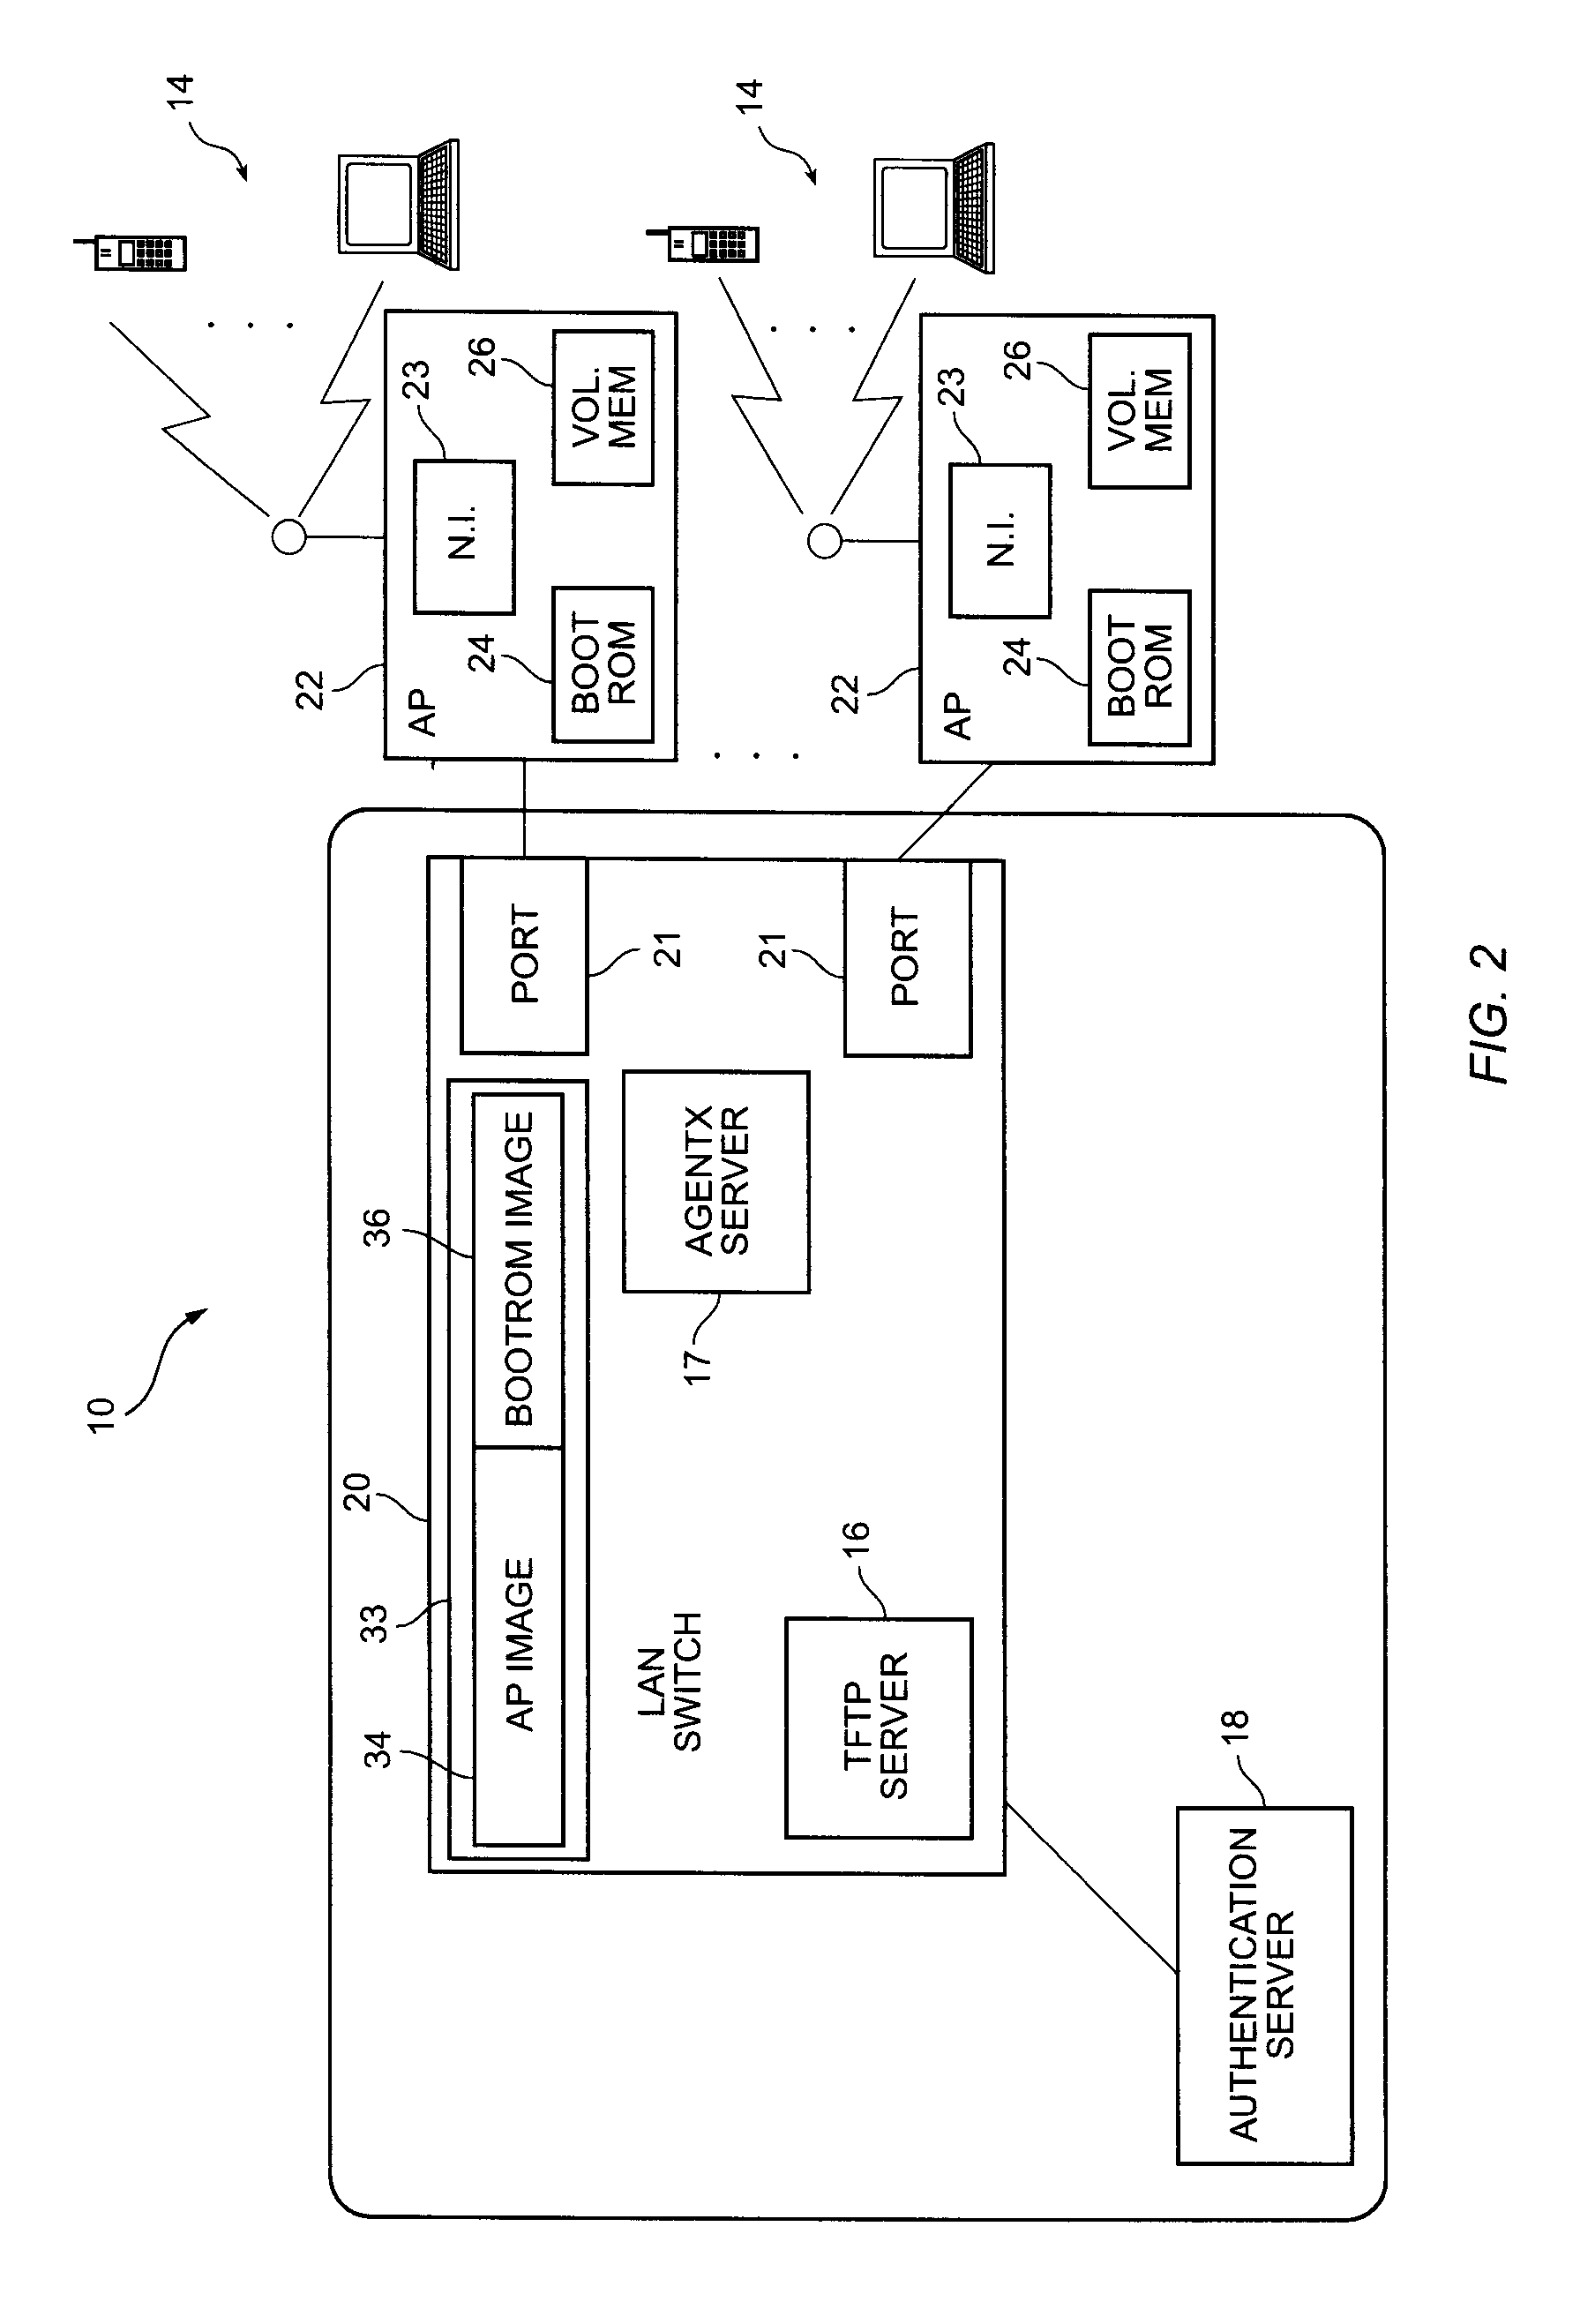 Apparatus, method and system for improving network security